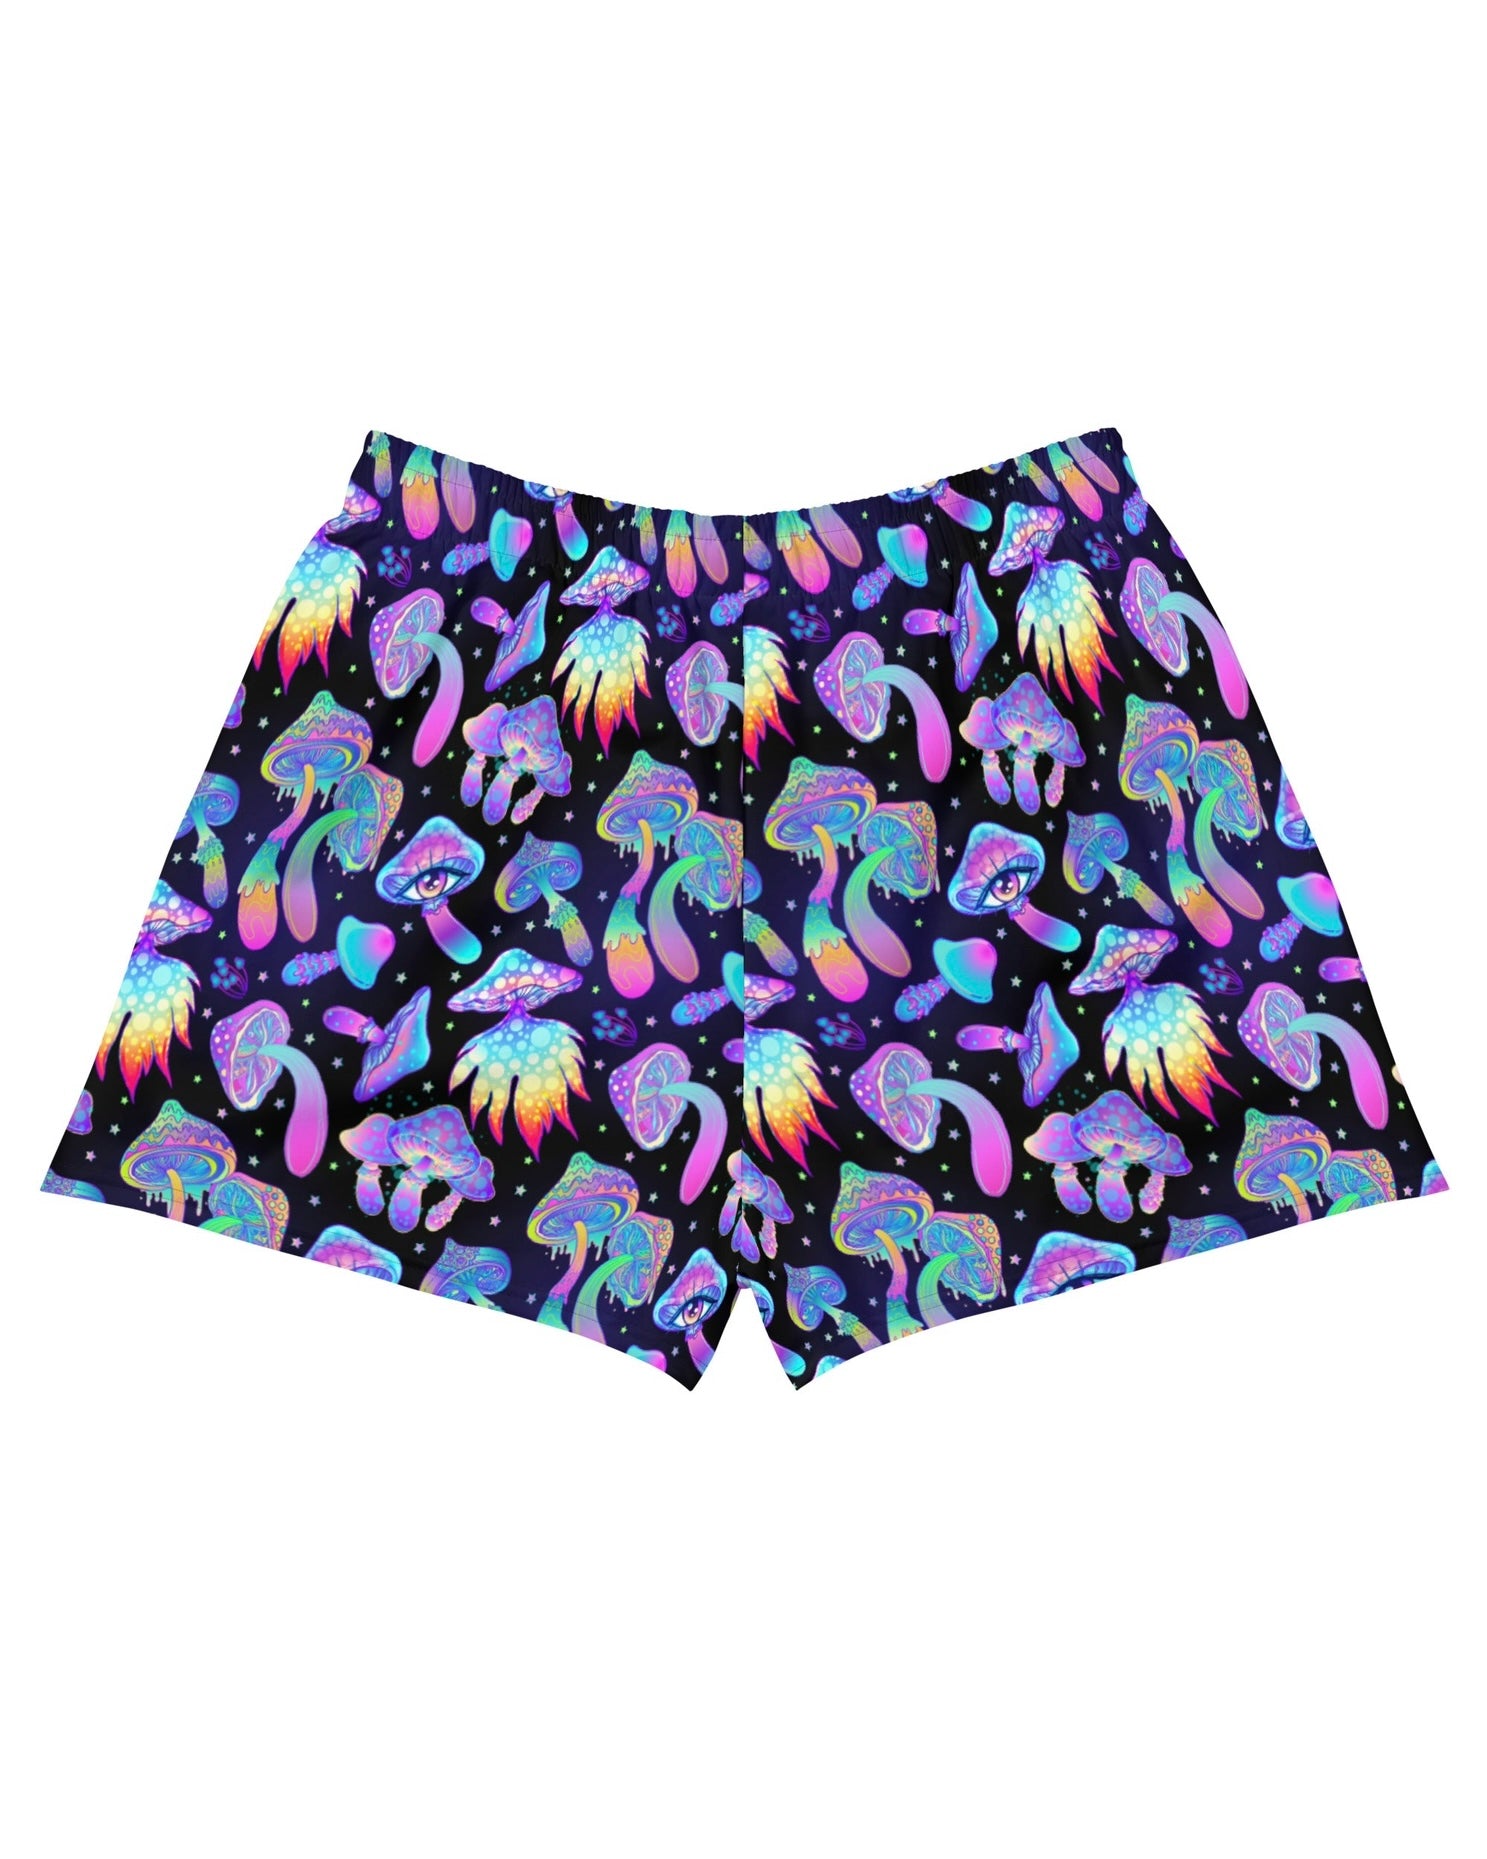 Shroomin Black Recycled Shorts, Athletic Shorts, - One Stop Rave